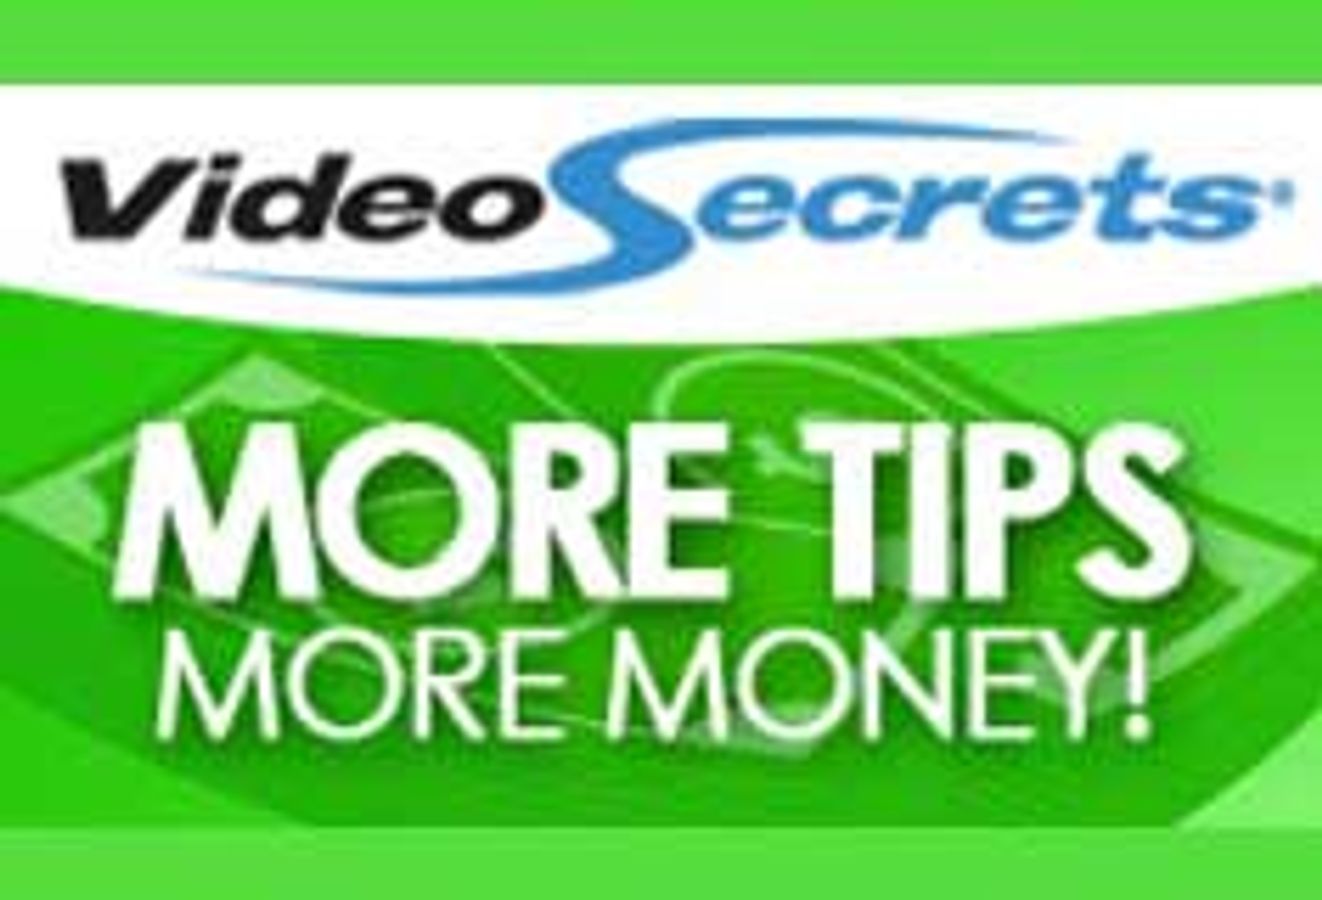 Video Secrets Variable Tipping